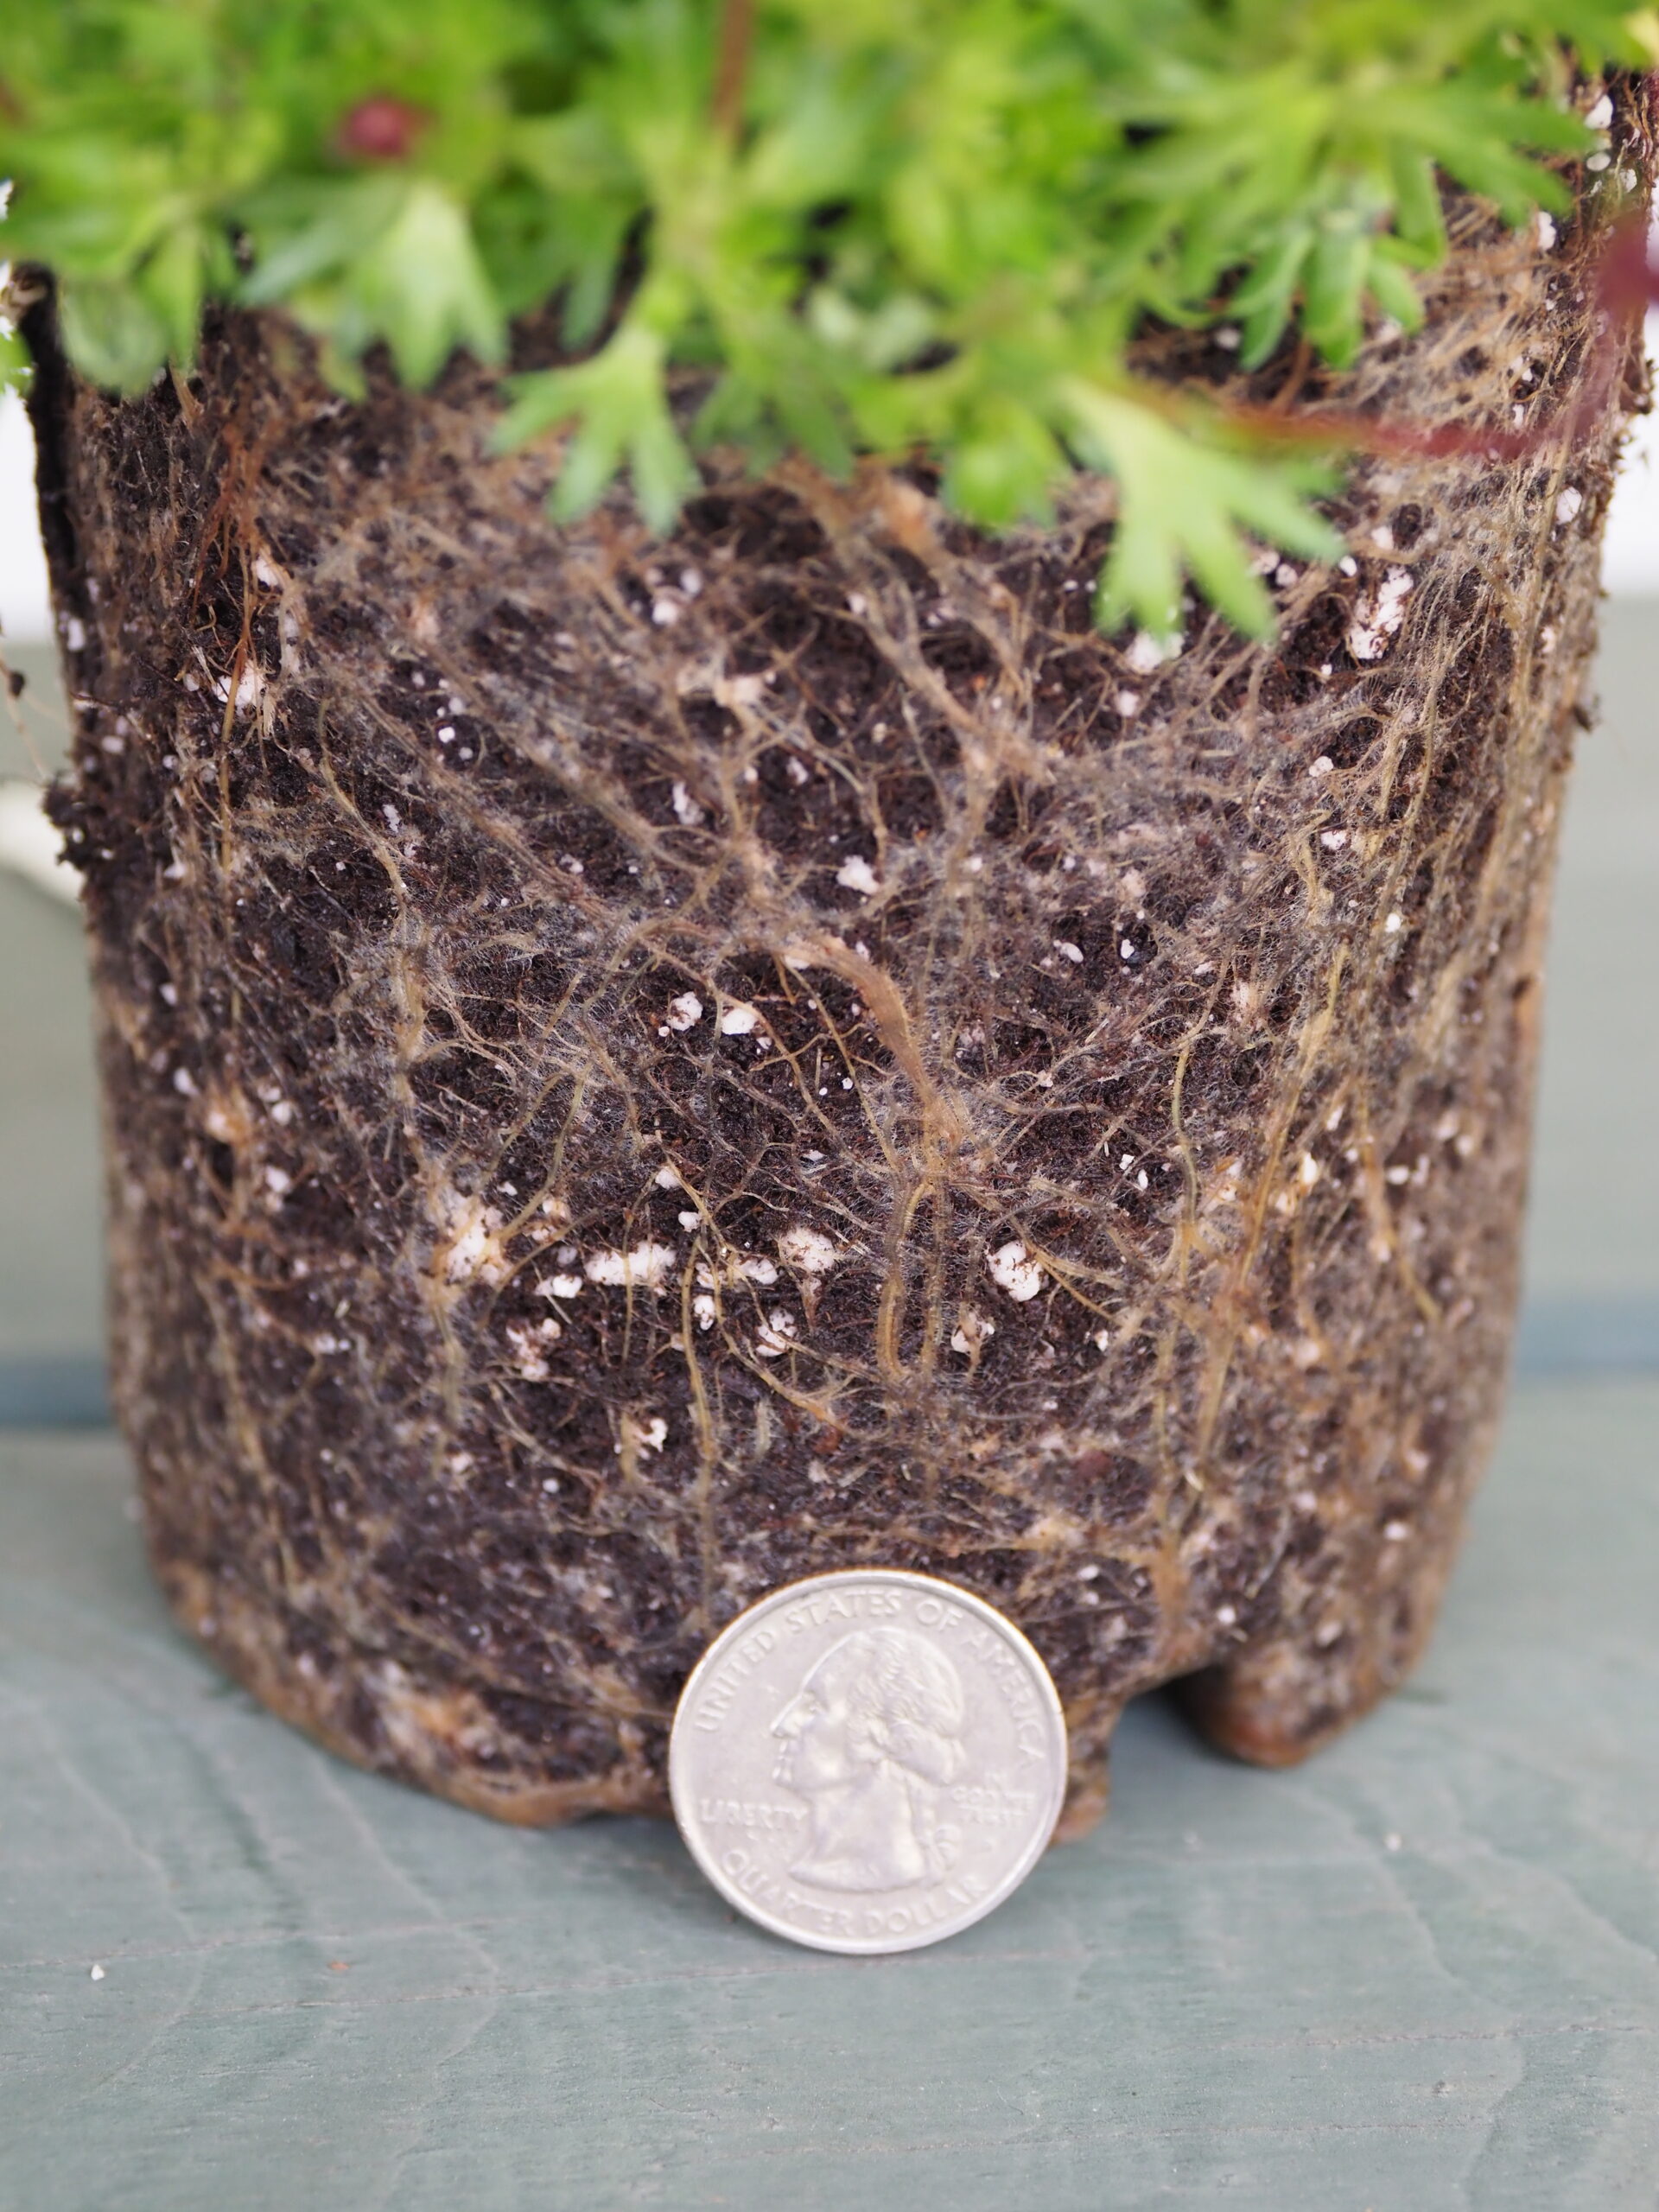 A closer view of the roots in the unpotted Mossy Pink. If planted like this, the roots will continue to grow mostly in the same circular pattern. To encourage better rooting and root growth, use your fingers to pull the roots and tease them out. When replanting, work the backfill soil in and around the roots to remove air pockets and insure good soil contact.  It only takes the roots of perennials a few weeks to reestablish and begin exploring into the surrounding soil.  Remember: Tease the roots out, don’t rip them apart.  ANDREW MESSINGER